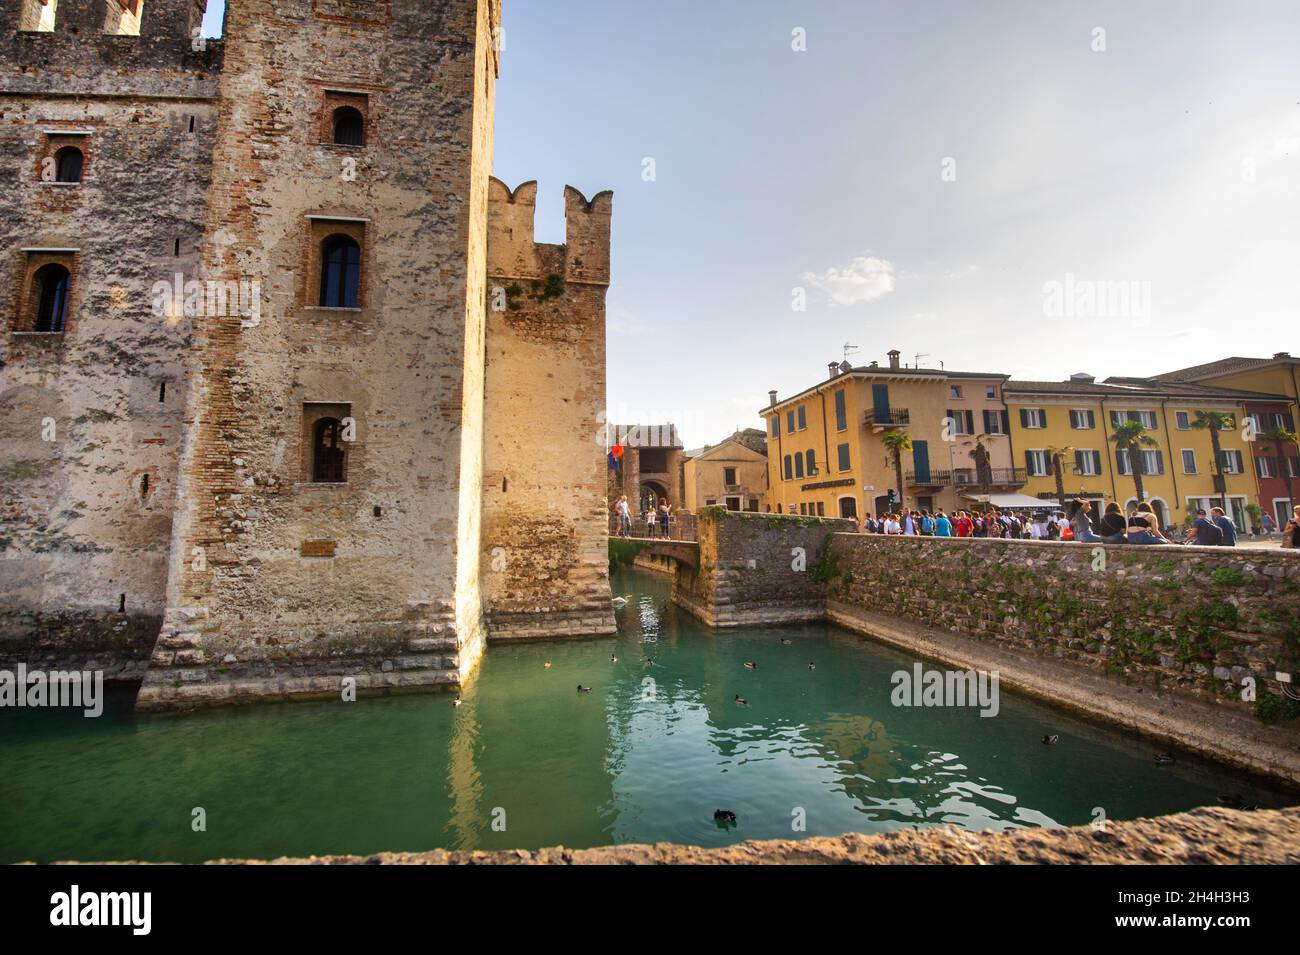 Sirmione, Italy-October 9, 2018: People relax in the town of Sirmione near the castle of Scaligera. Stock Photo